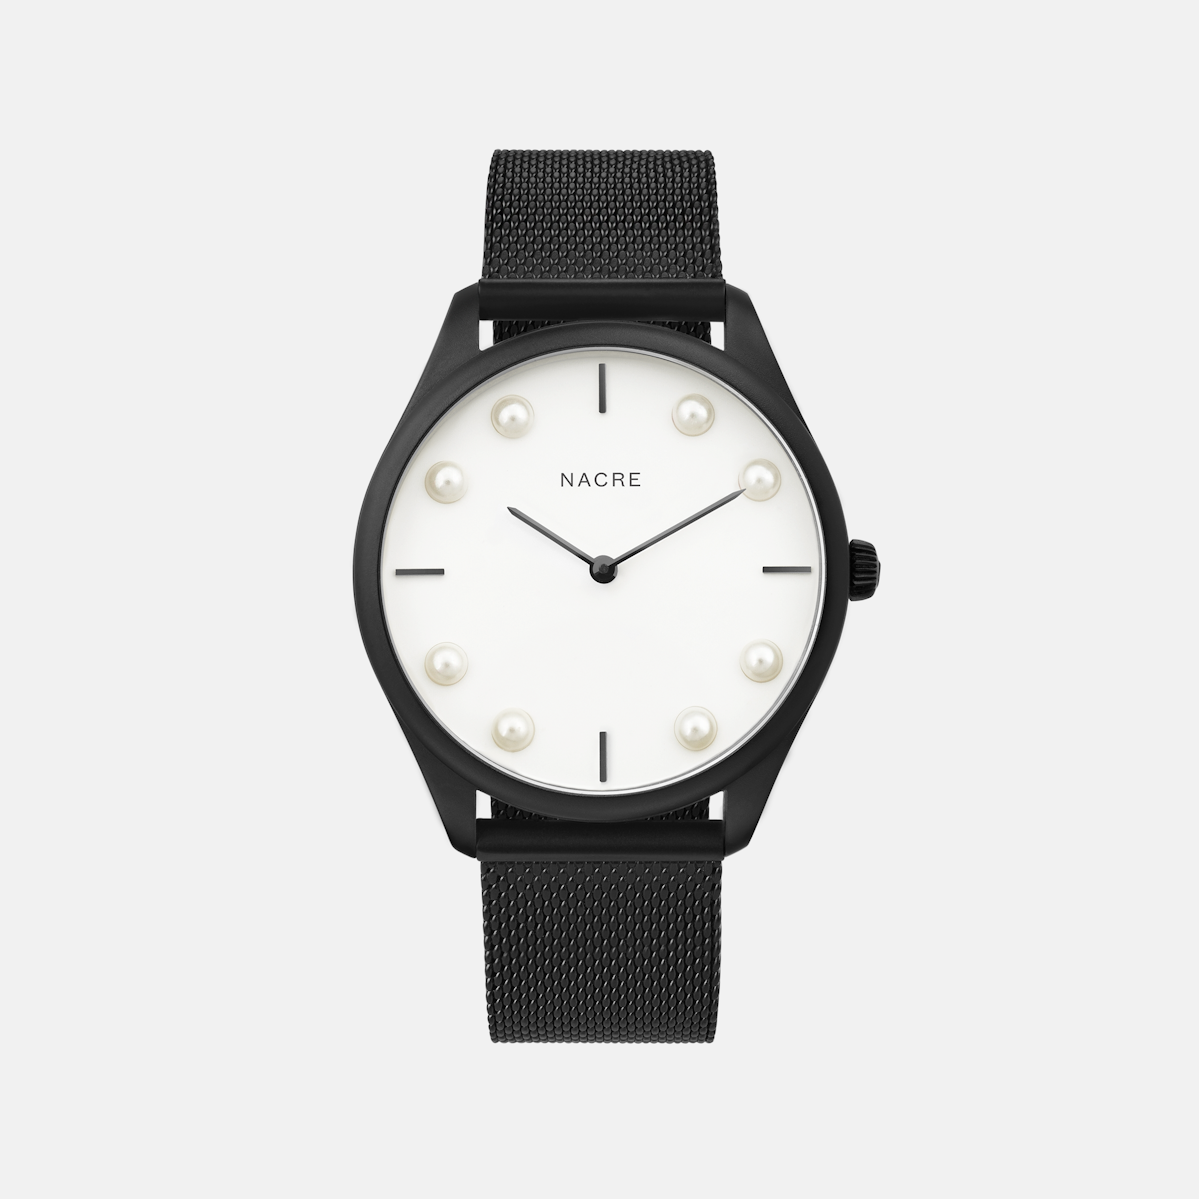 Lune 8 - Matte Black and White - Navy Leather